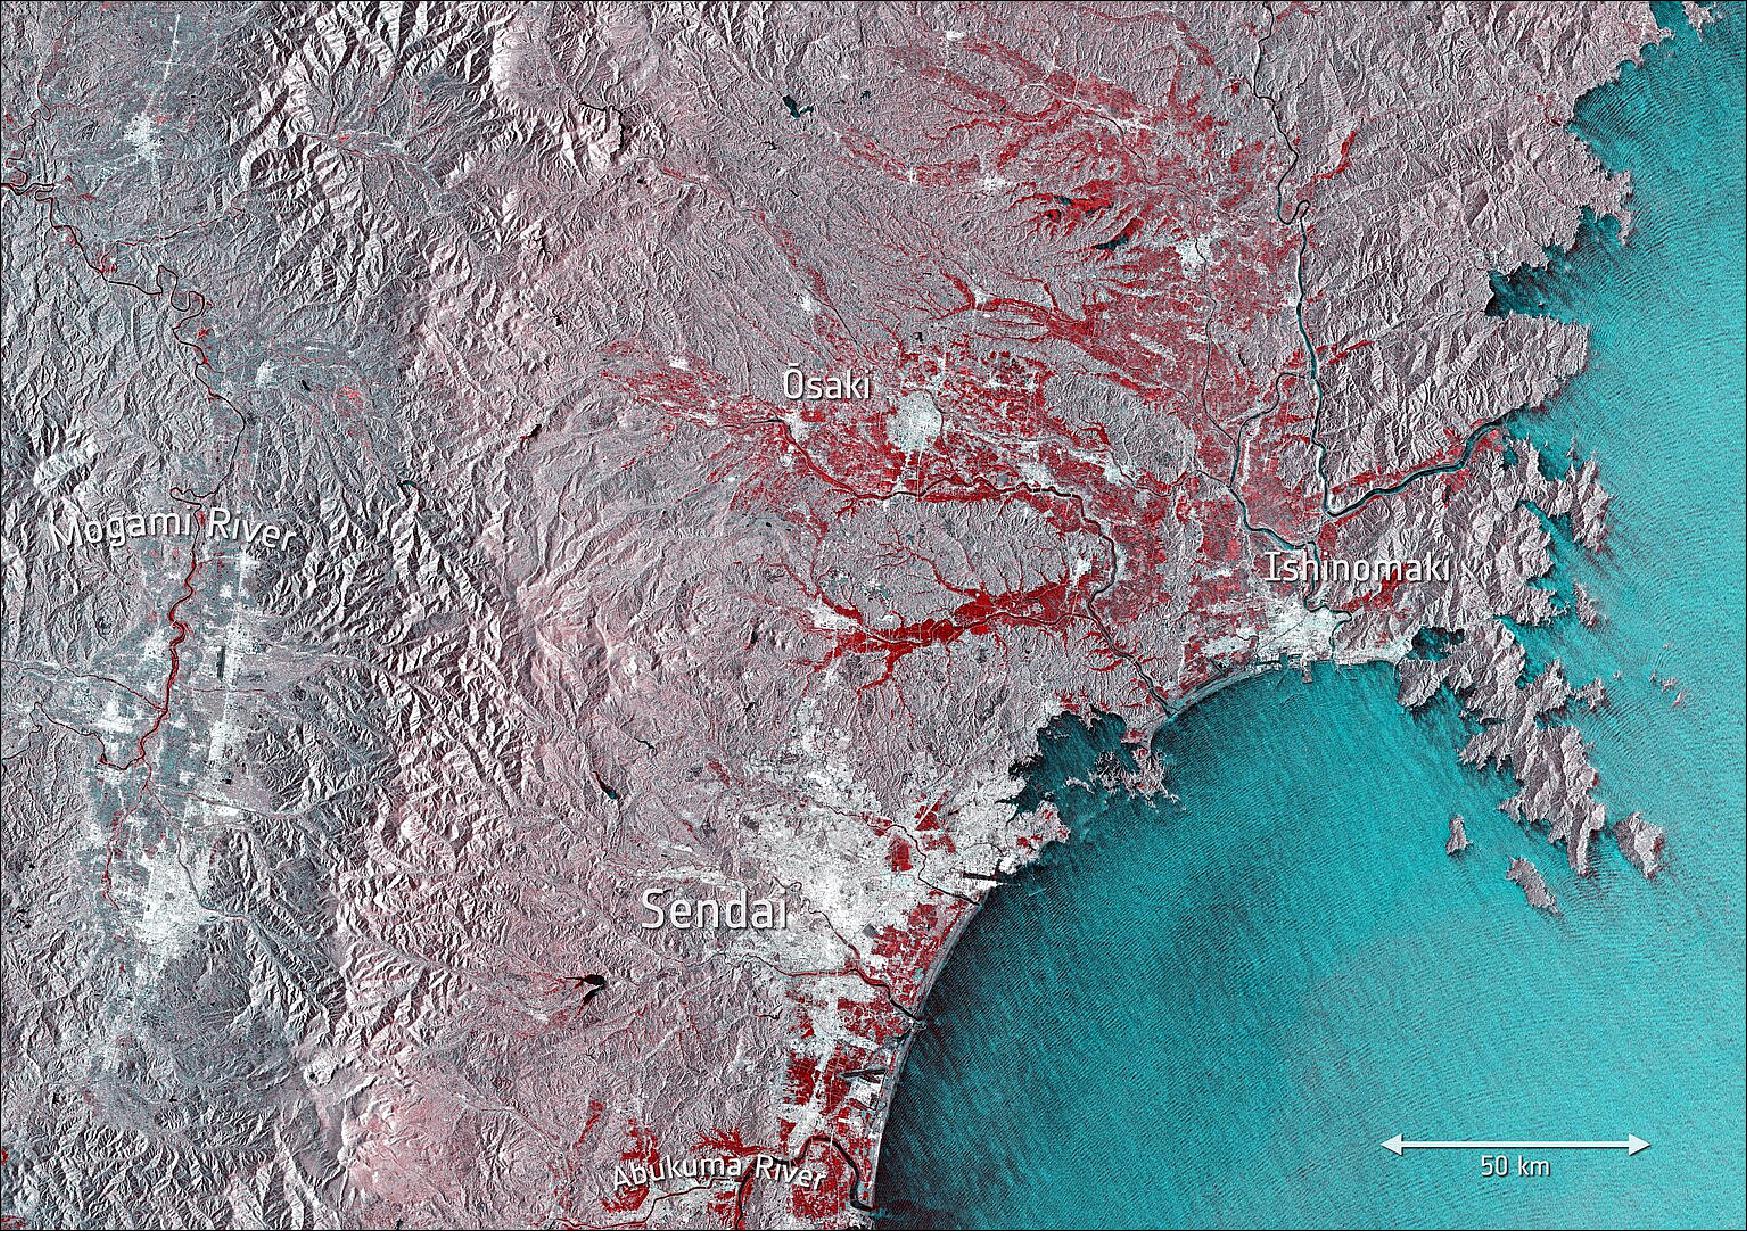 Figure 7: This image shows the extent of flooding on Japan’s main island of Honshu. Captured by the Copernicus Sentinel-1 mission, the image shows the floods in red around the cities of Sendai and Ishinomaki on 12 October (image credit: ESA, this image contains modified Copernicus Sentinel data (2019), processed by ESA, CC BY-SA 3.0 IGO)